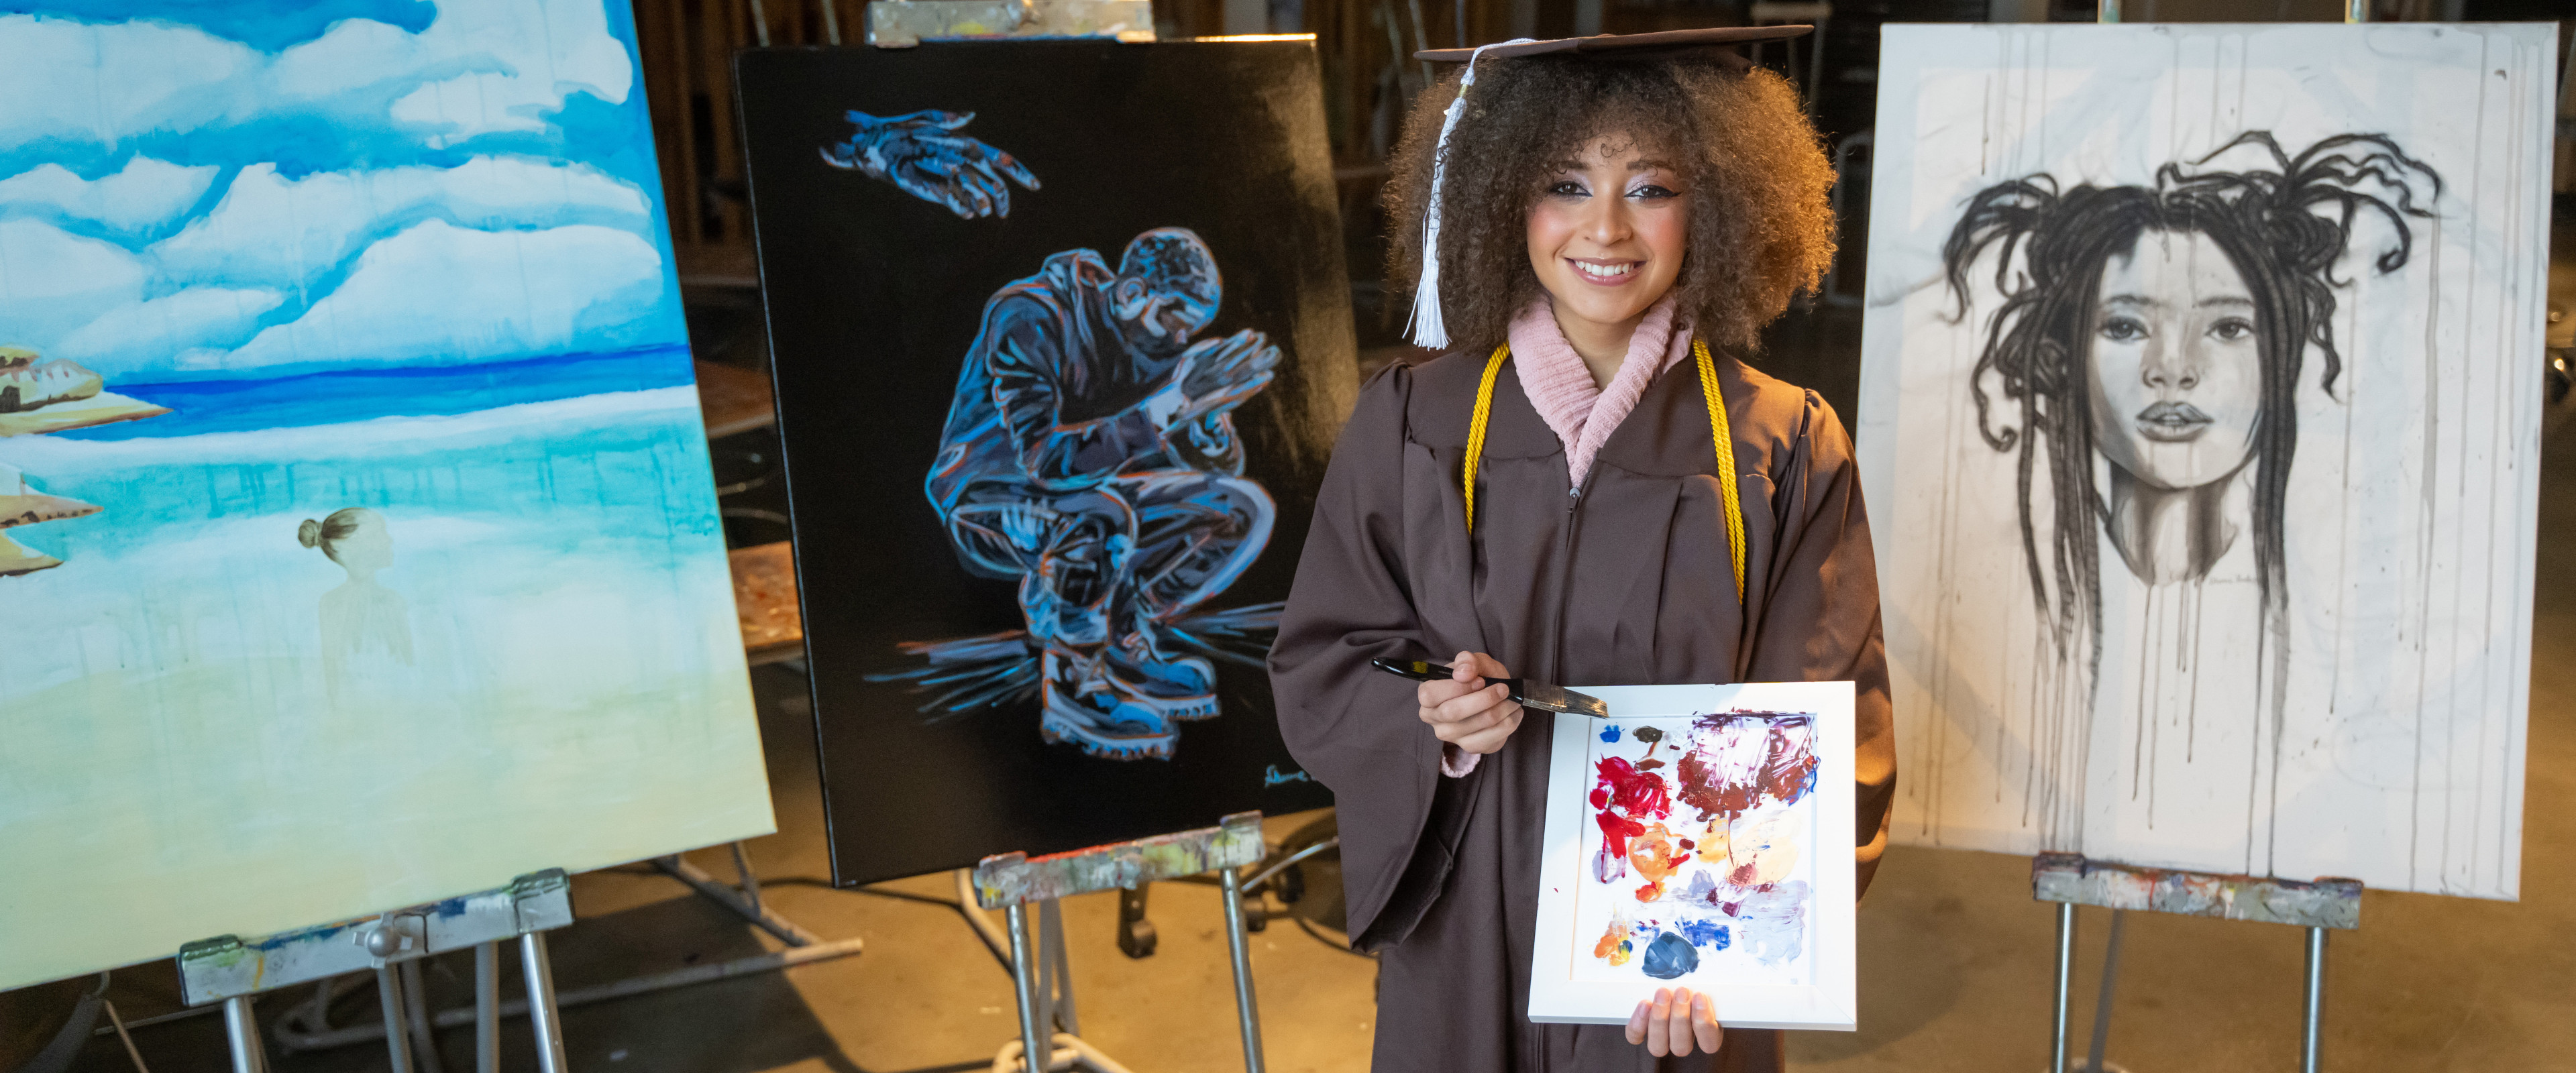 Sharmane Flanders holds a colorful canvas while wearing her graduation regalia. Three of her original paintings are in the background.